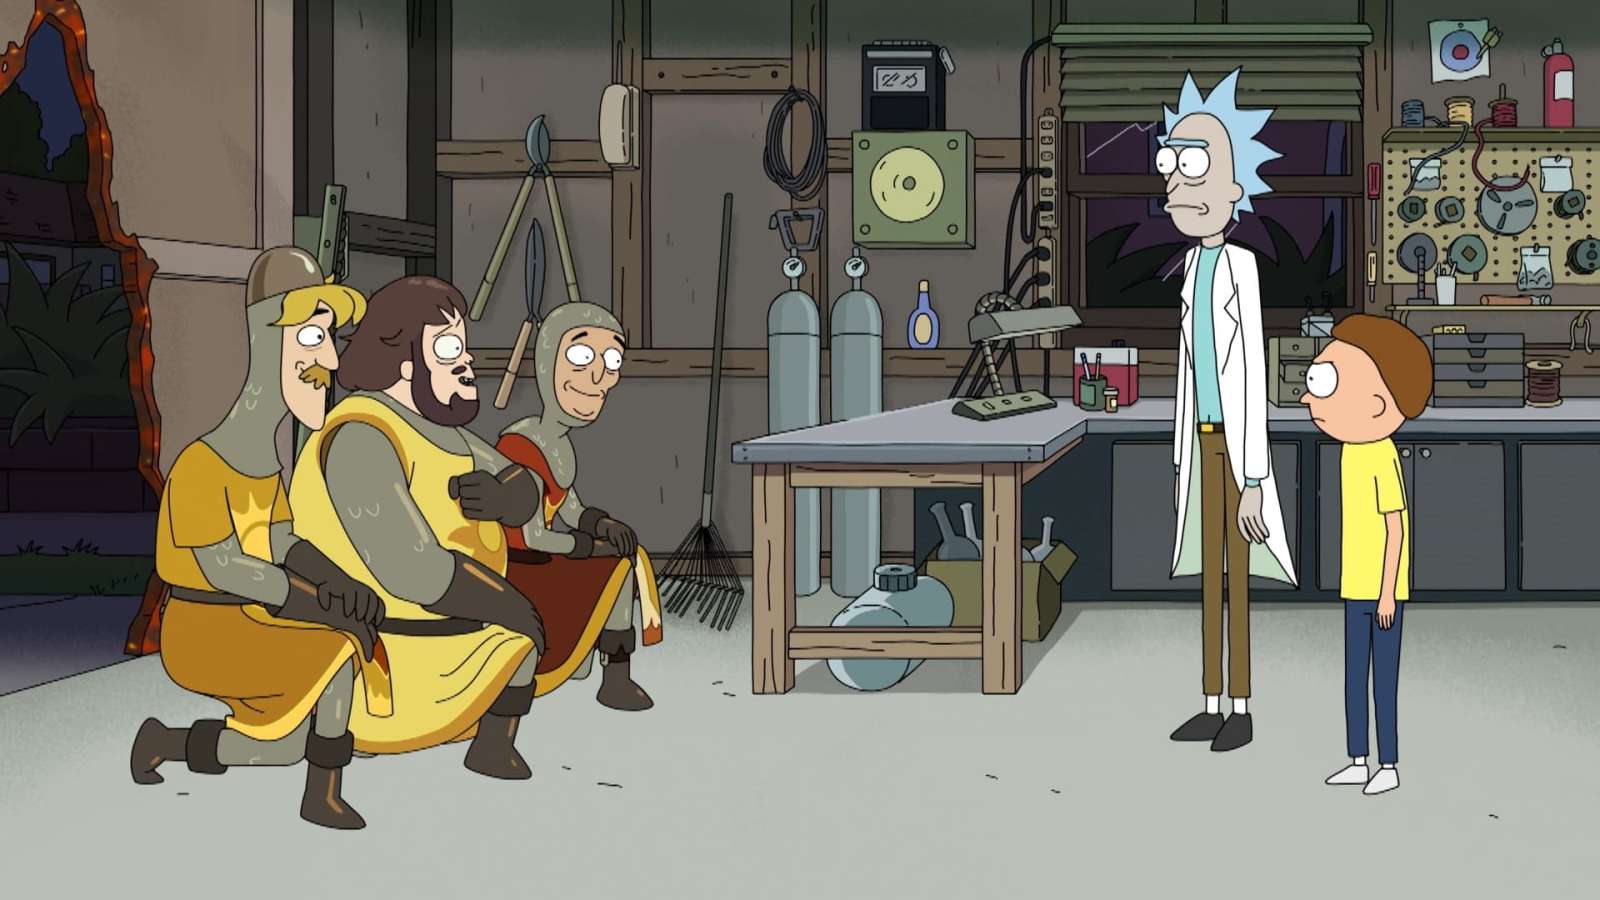 Rick and Morty : A Rick in King Mortur's Mort